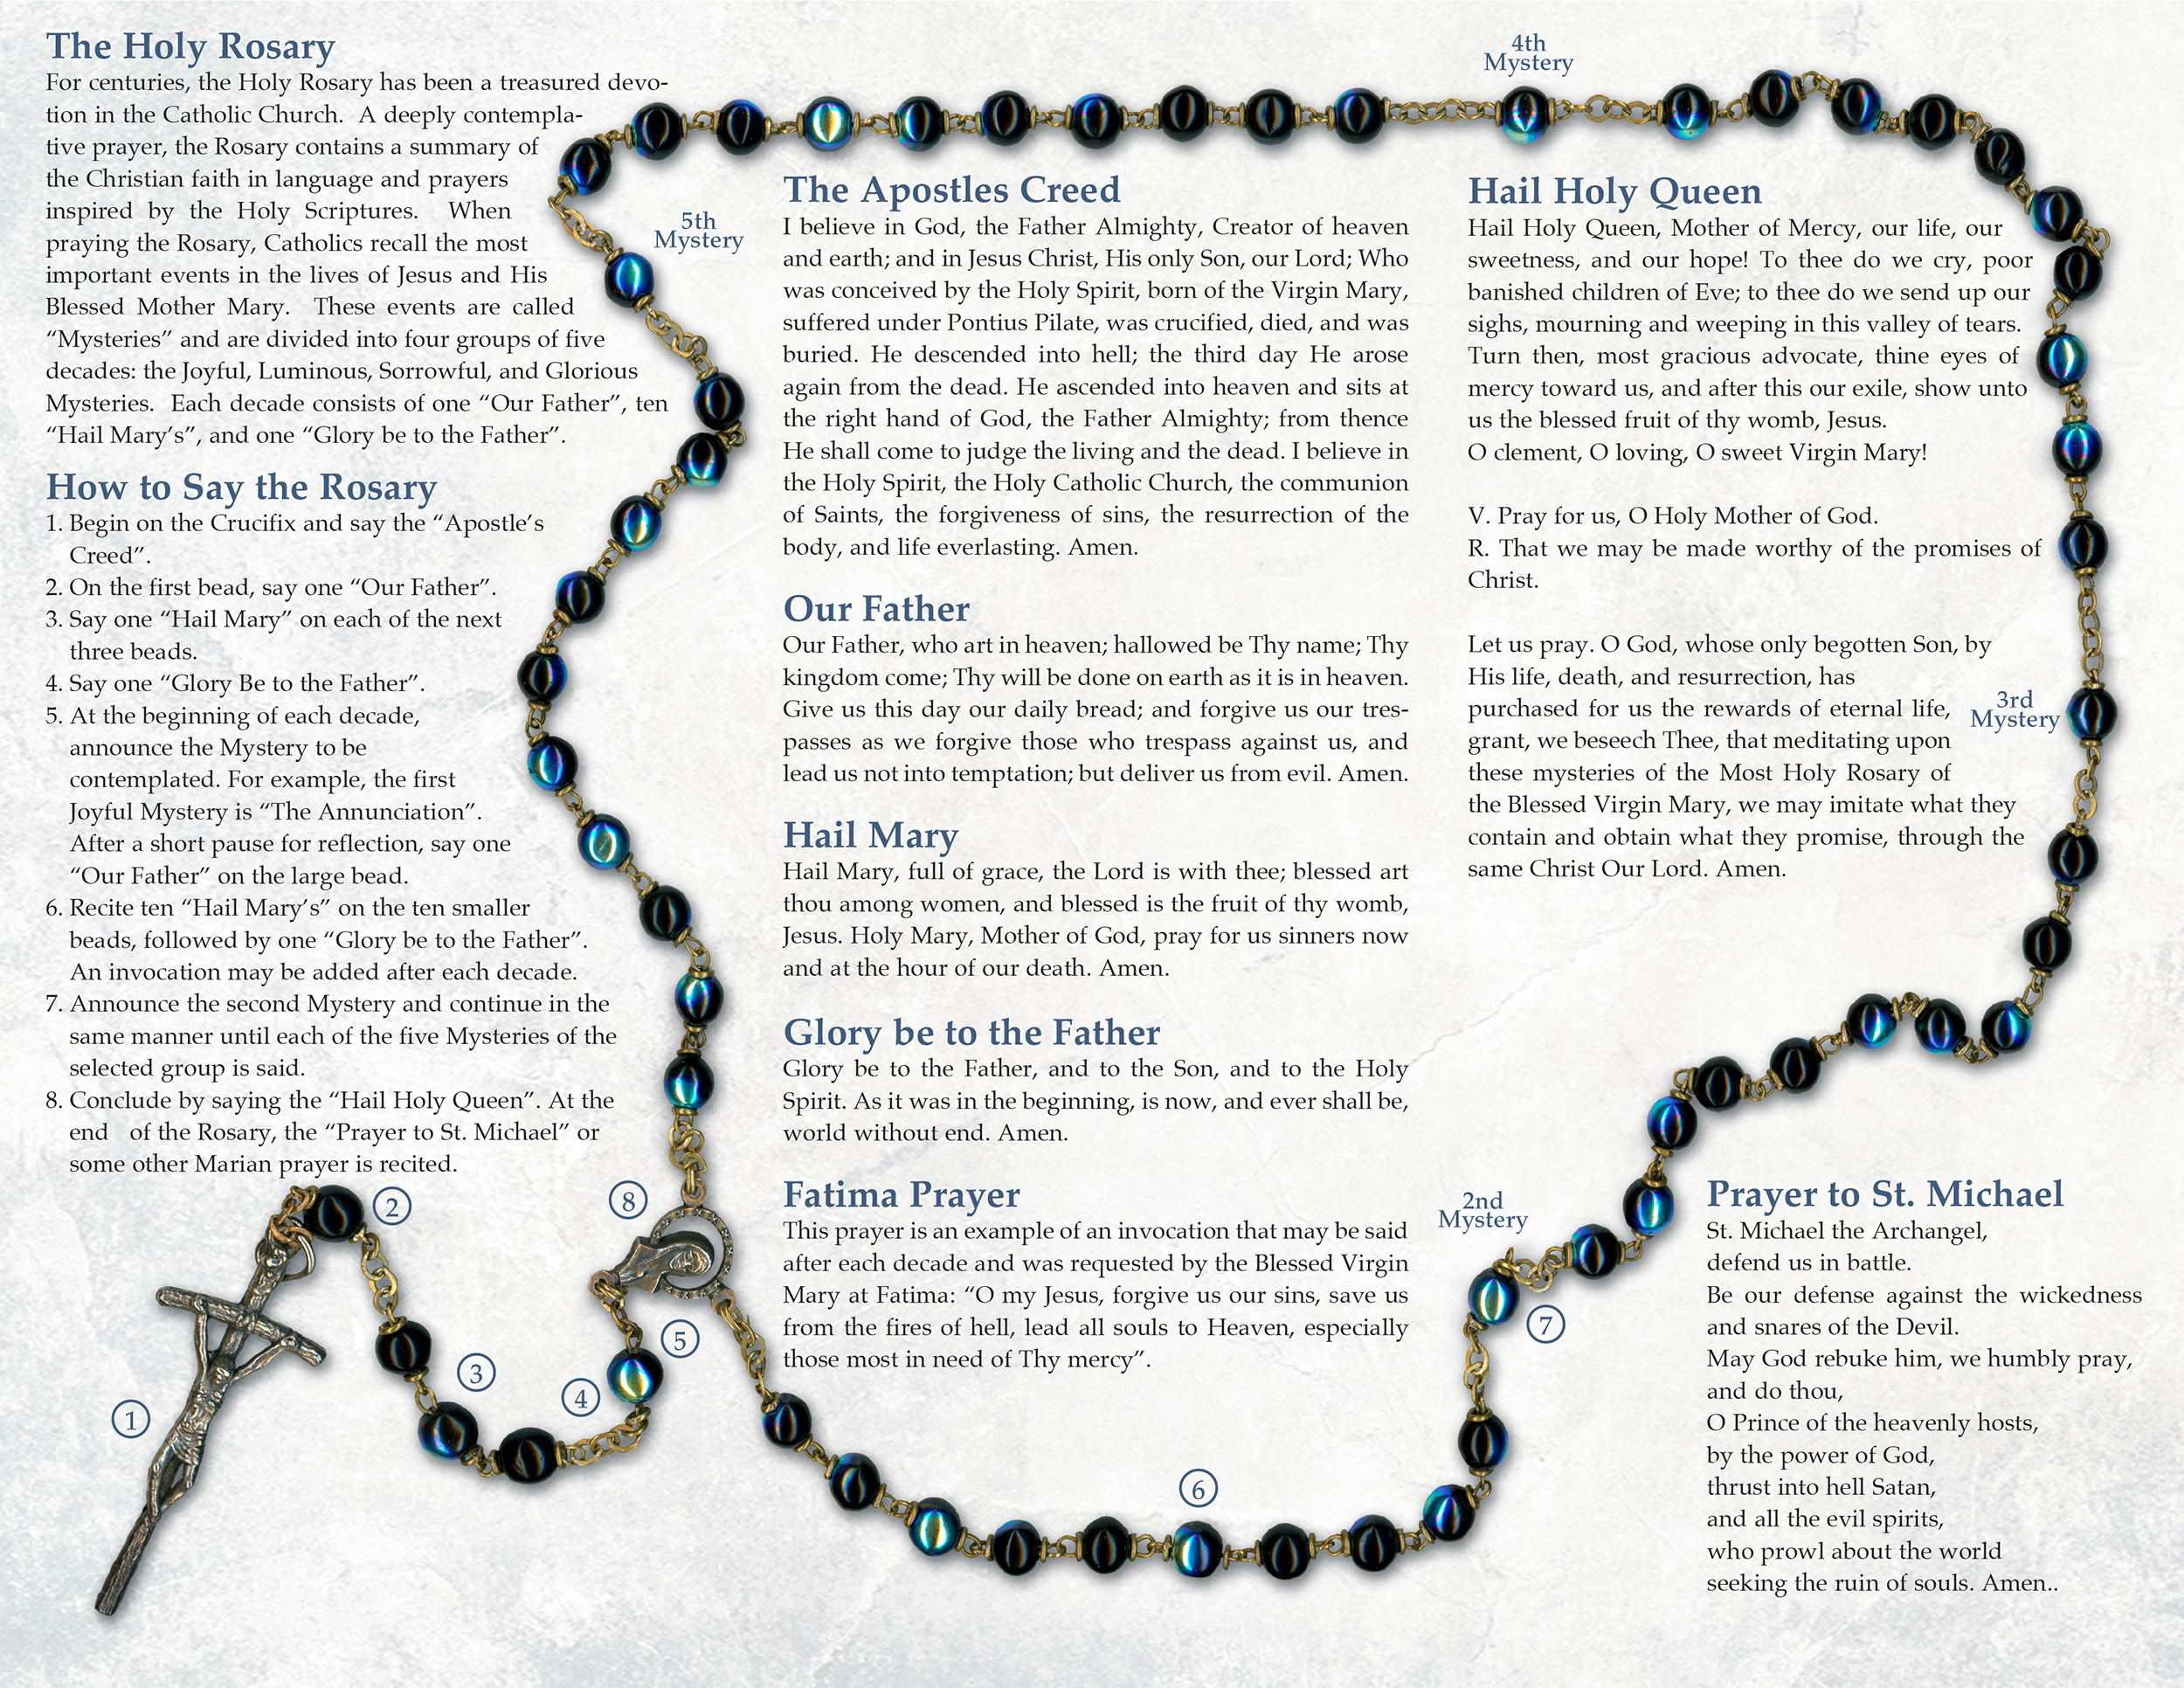 Rosary and instructions on how to pray the rosary